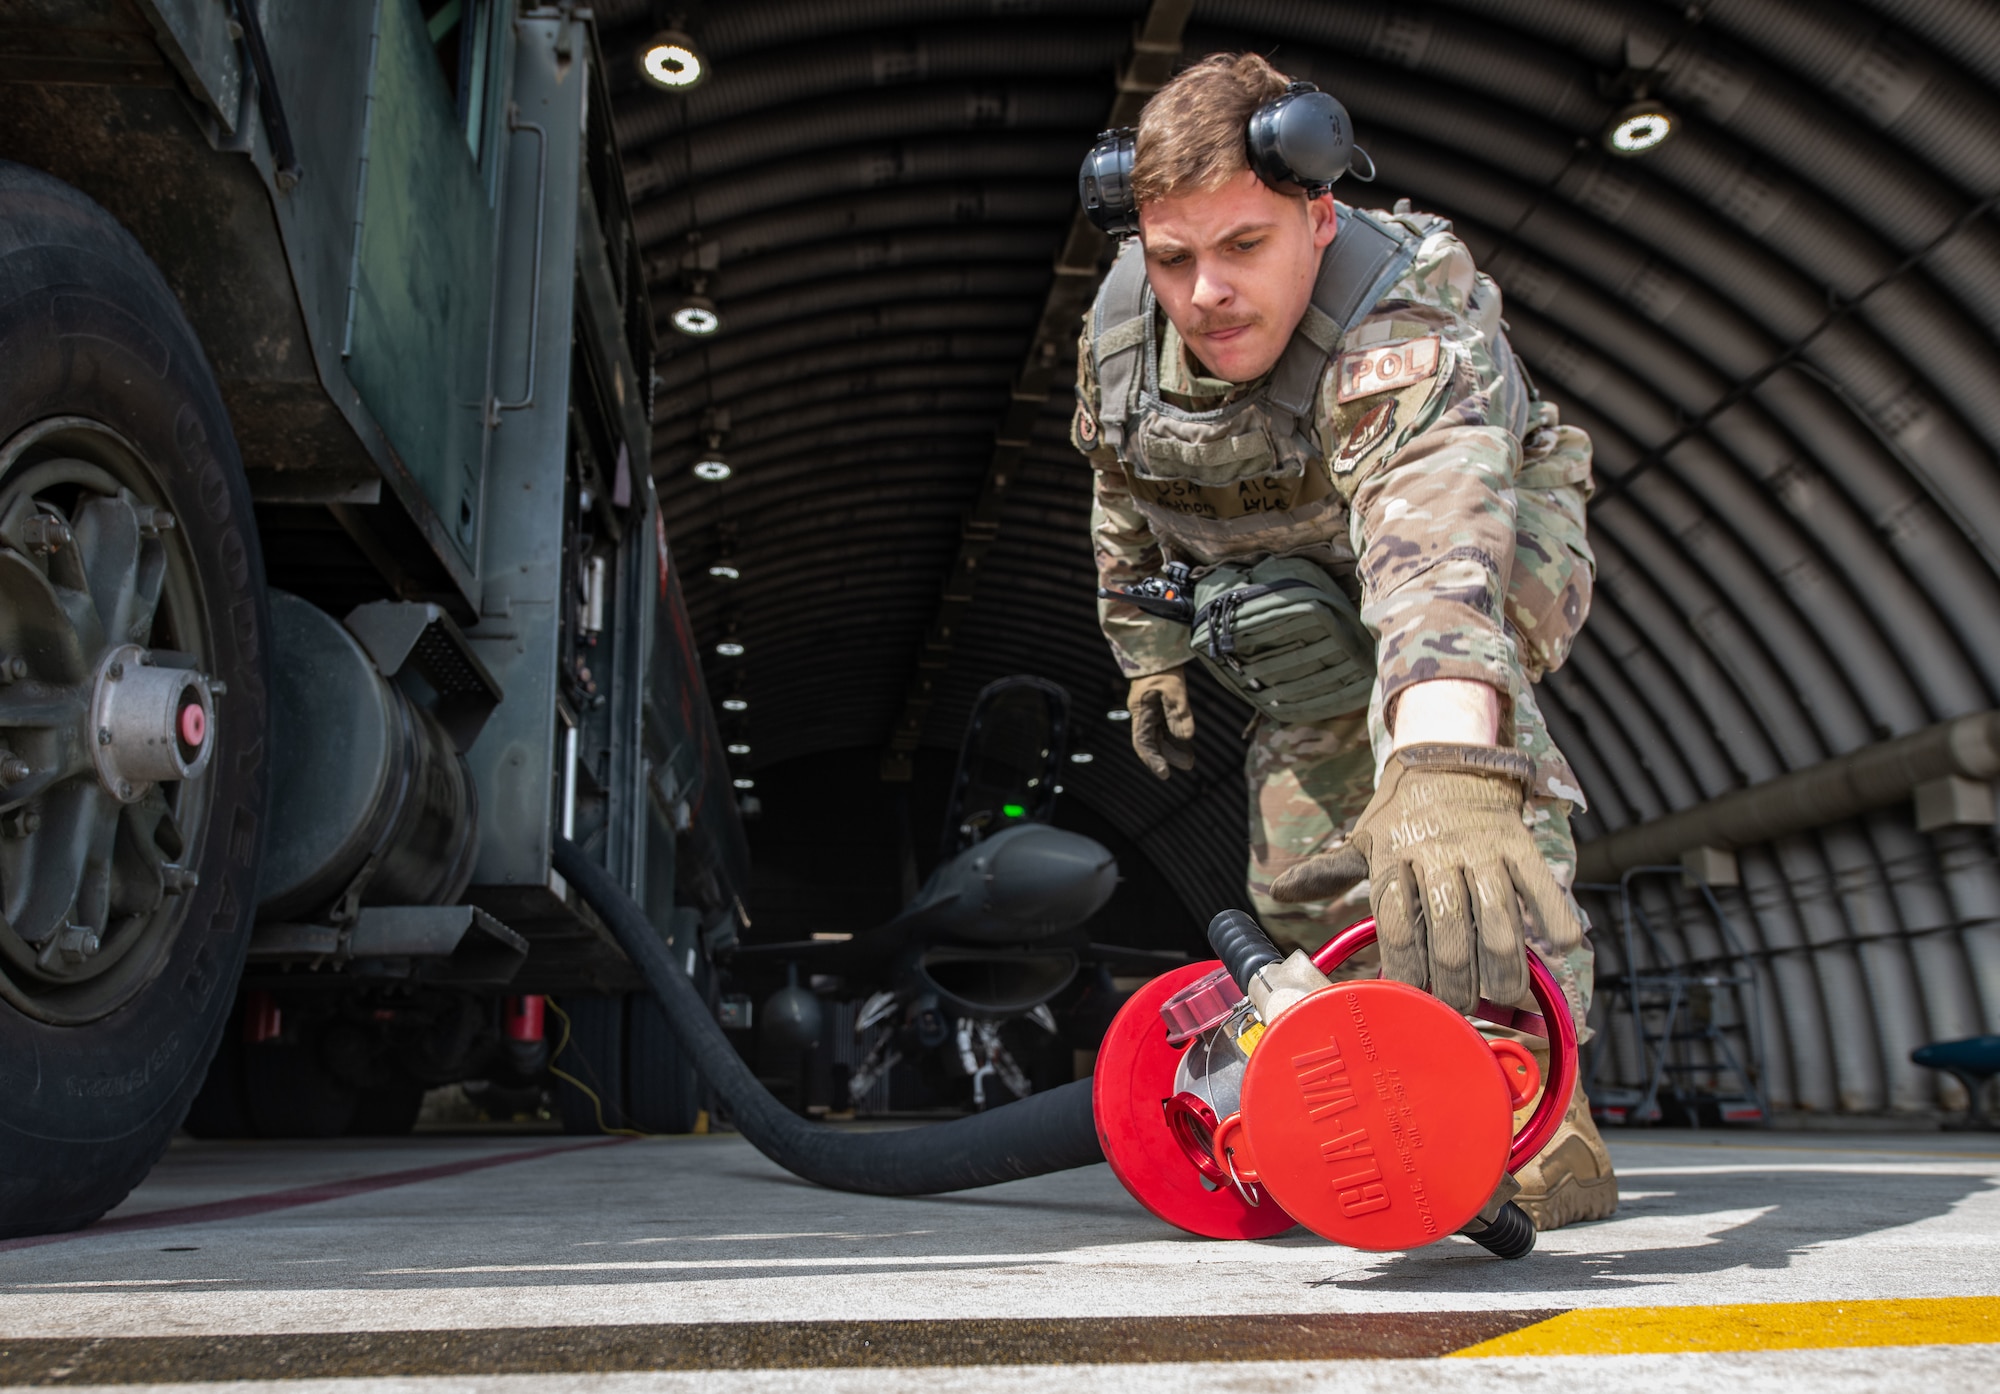 Airman 1st Class Anthony Lyles, 8th Logistics Readiness Squadron fuels distribution operator, stows a fuel hose at Kunsan Air Base, Republic of Korea, April 28, 2022. Fuels distribution is one facet of many the Airmen of the 8th LRS petroleum, oil and lubricants flight (POL) is responsible for. To ensure the Wolf Pack’s fuels supply is ready for use, it must be quality controlled in the fuel laboratory, which ensures the fuel being used hasn’t been contaminated.  (U.S. Air Force photo by Staff Sgt. Gabrielle Spalding)